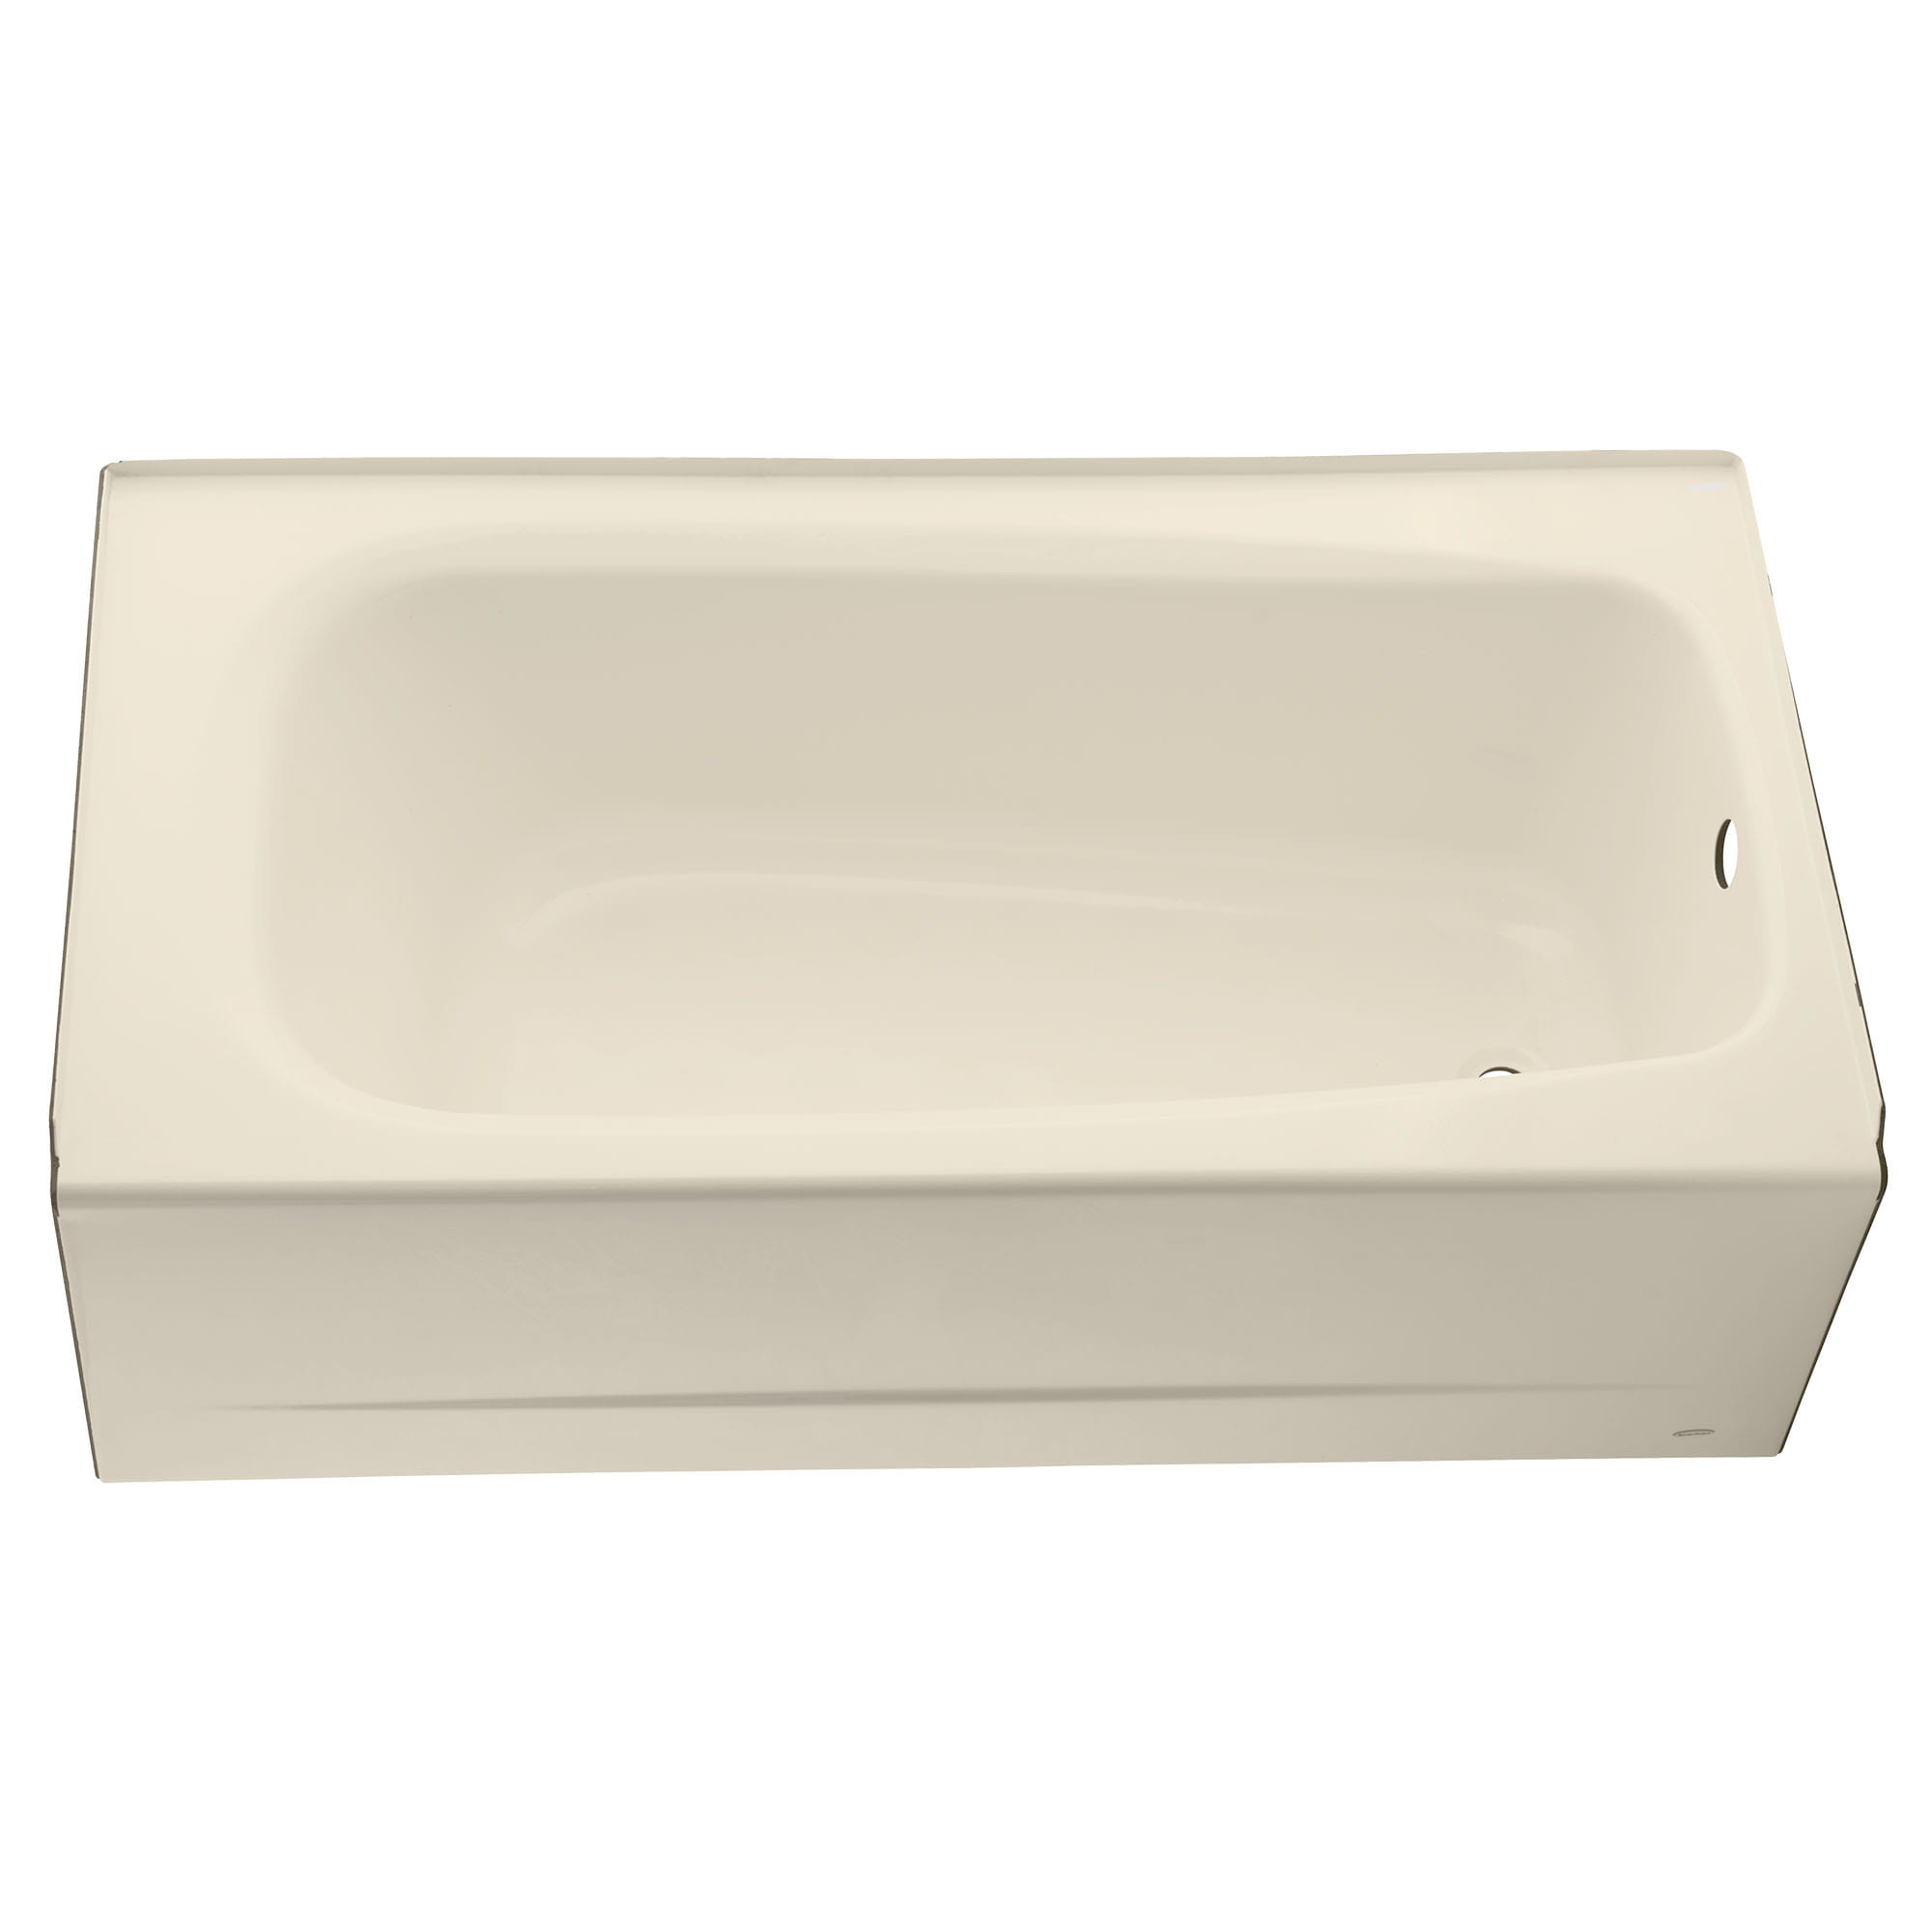 Cambridge Americast 60 x 32 Inch Integral Apron Bathtub With Right Hand Outlet BONE